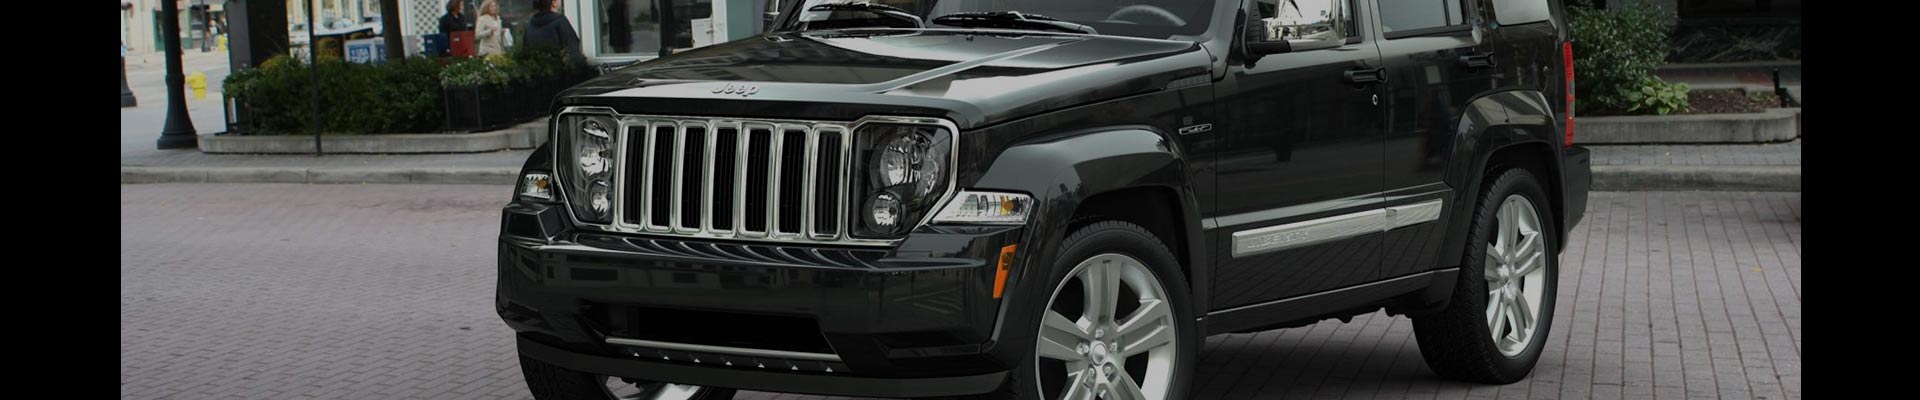 Shop Replacement and OEM 2005 Jeep Liberty Parts with Discounted Price on the Net